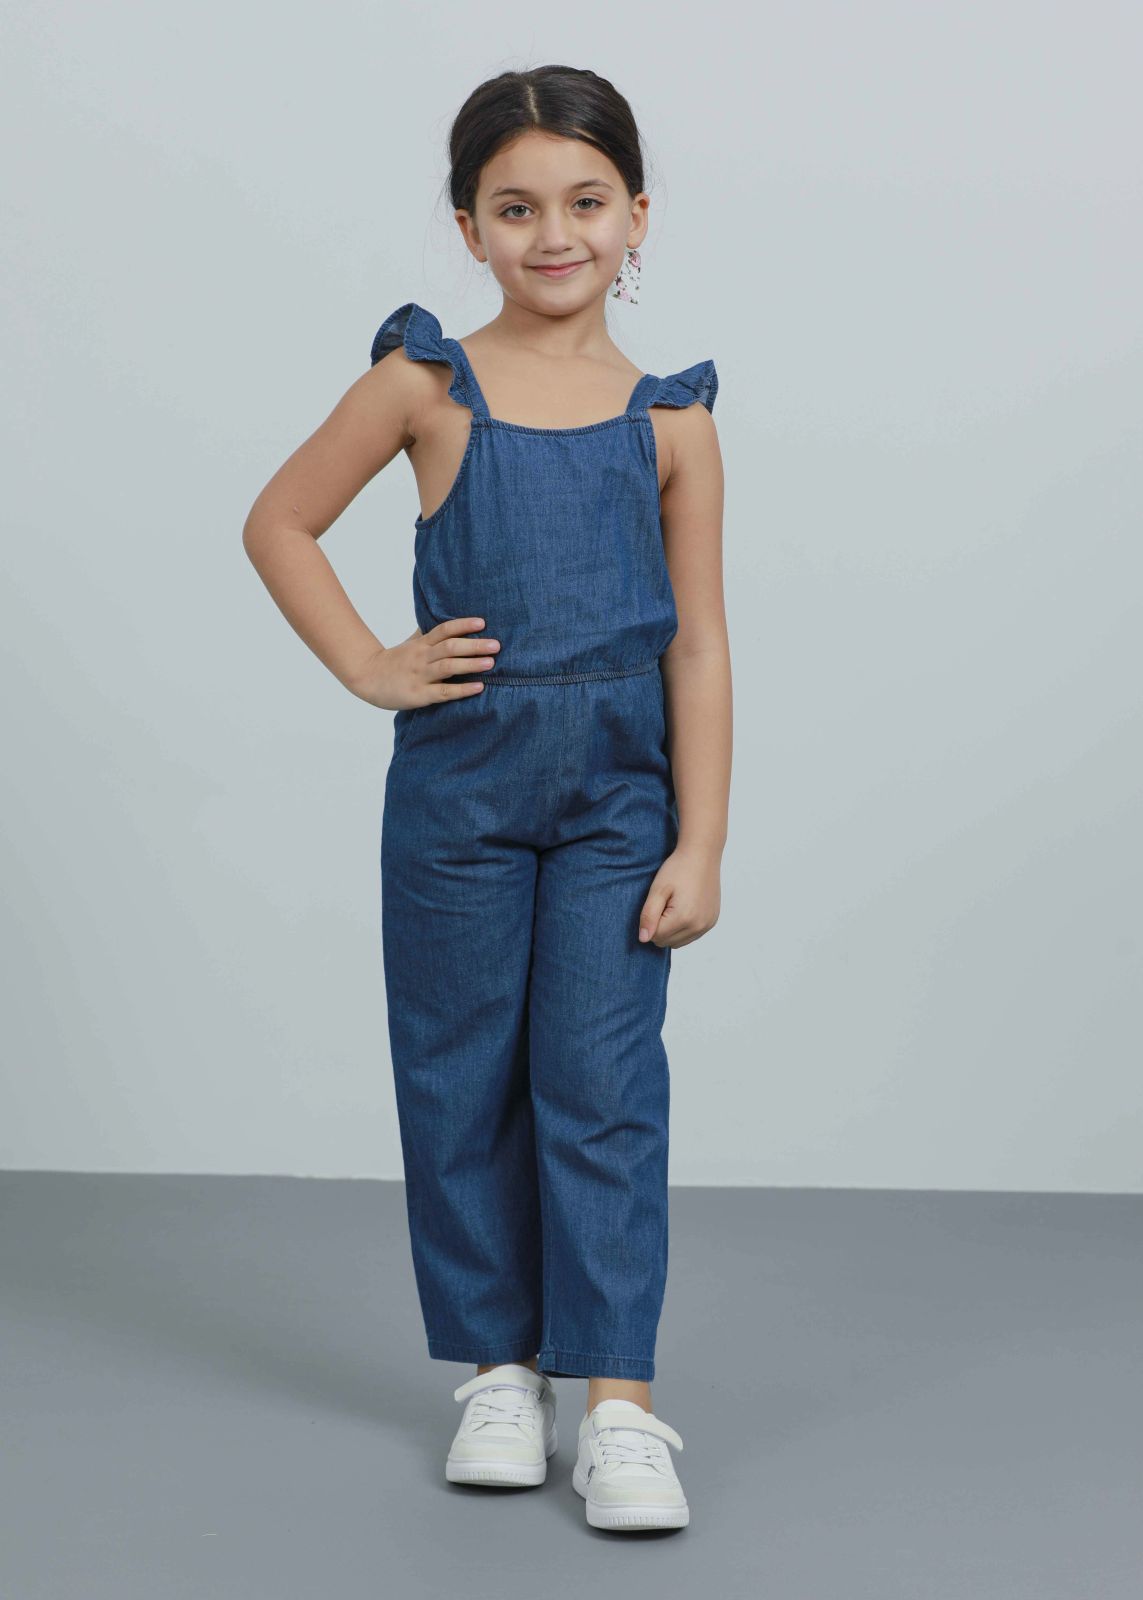 Cotton Jumpsuits In Mumbai, Maharashtra At Best Price | Cotton Jumpsuits  Manufacturers, Suppliers In Bombay